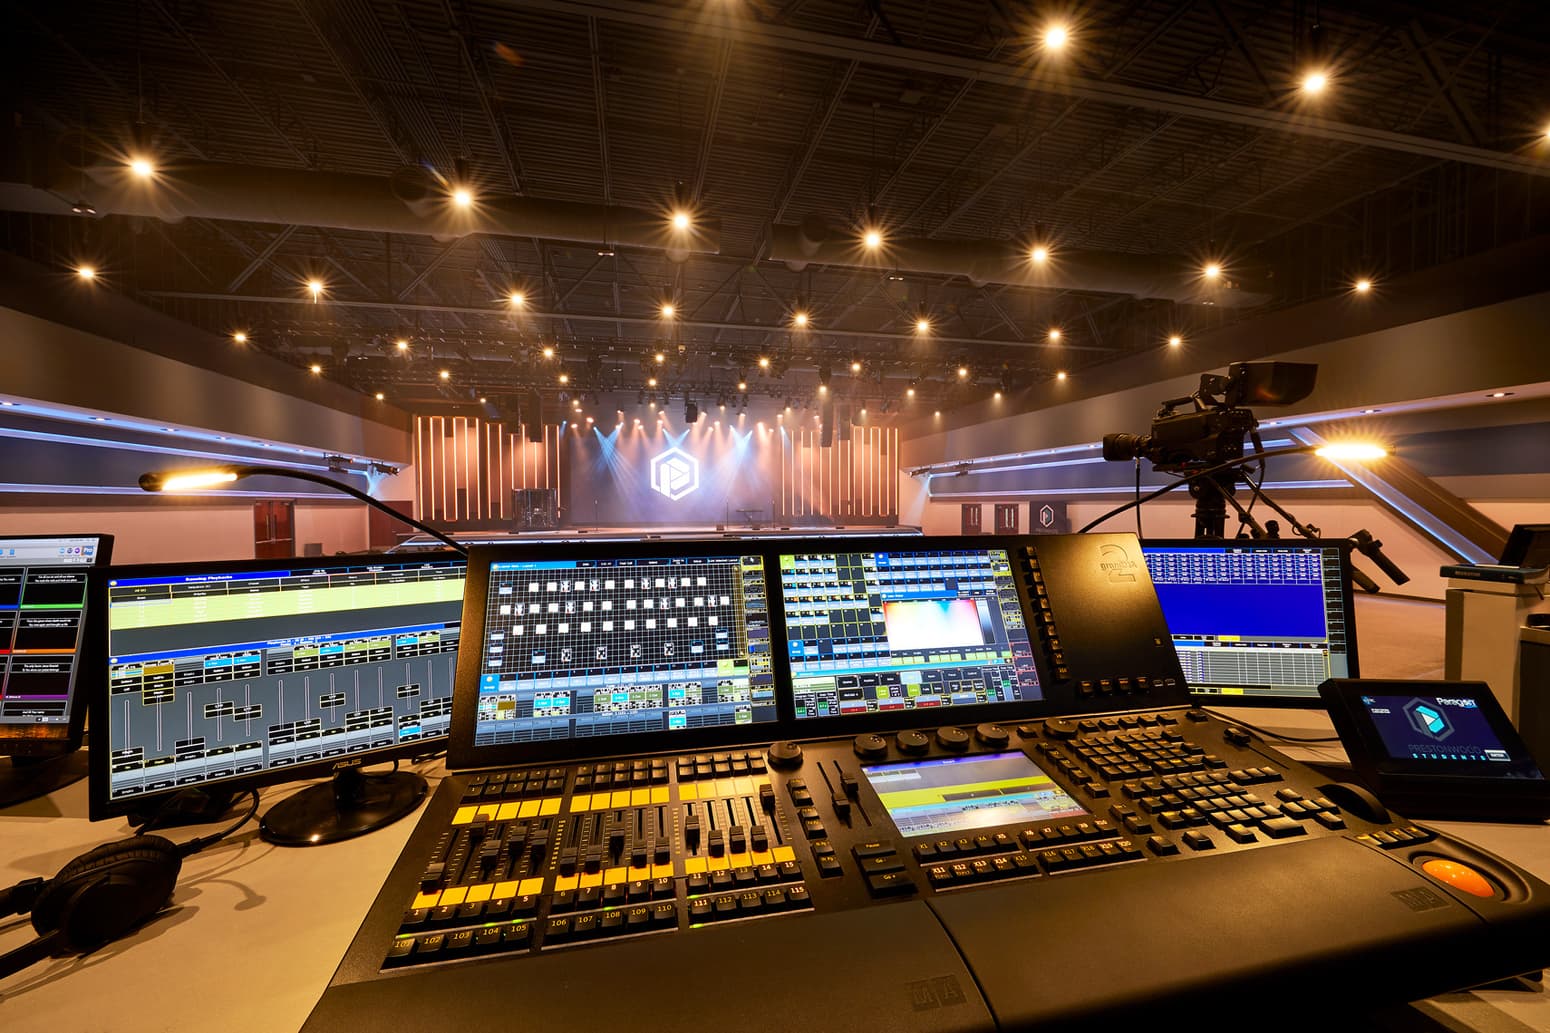 These controls for LED church stage lighting and AVL church speakers give Prestonwood Baptist control.